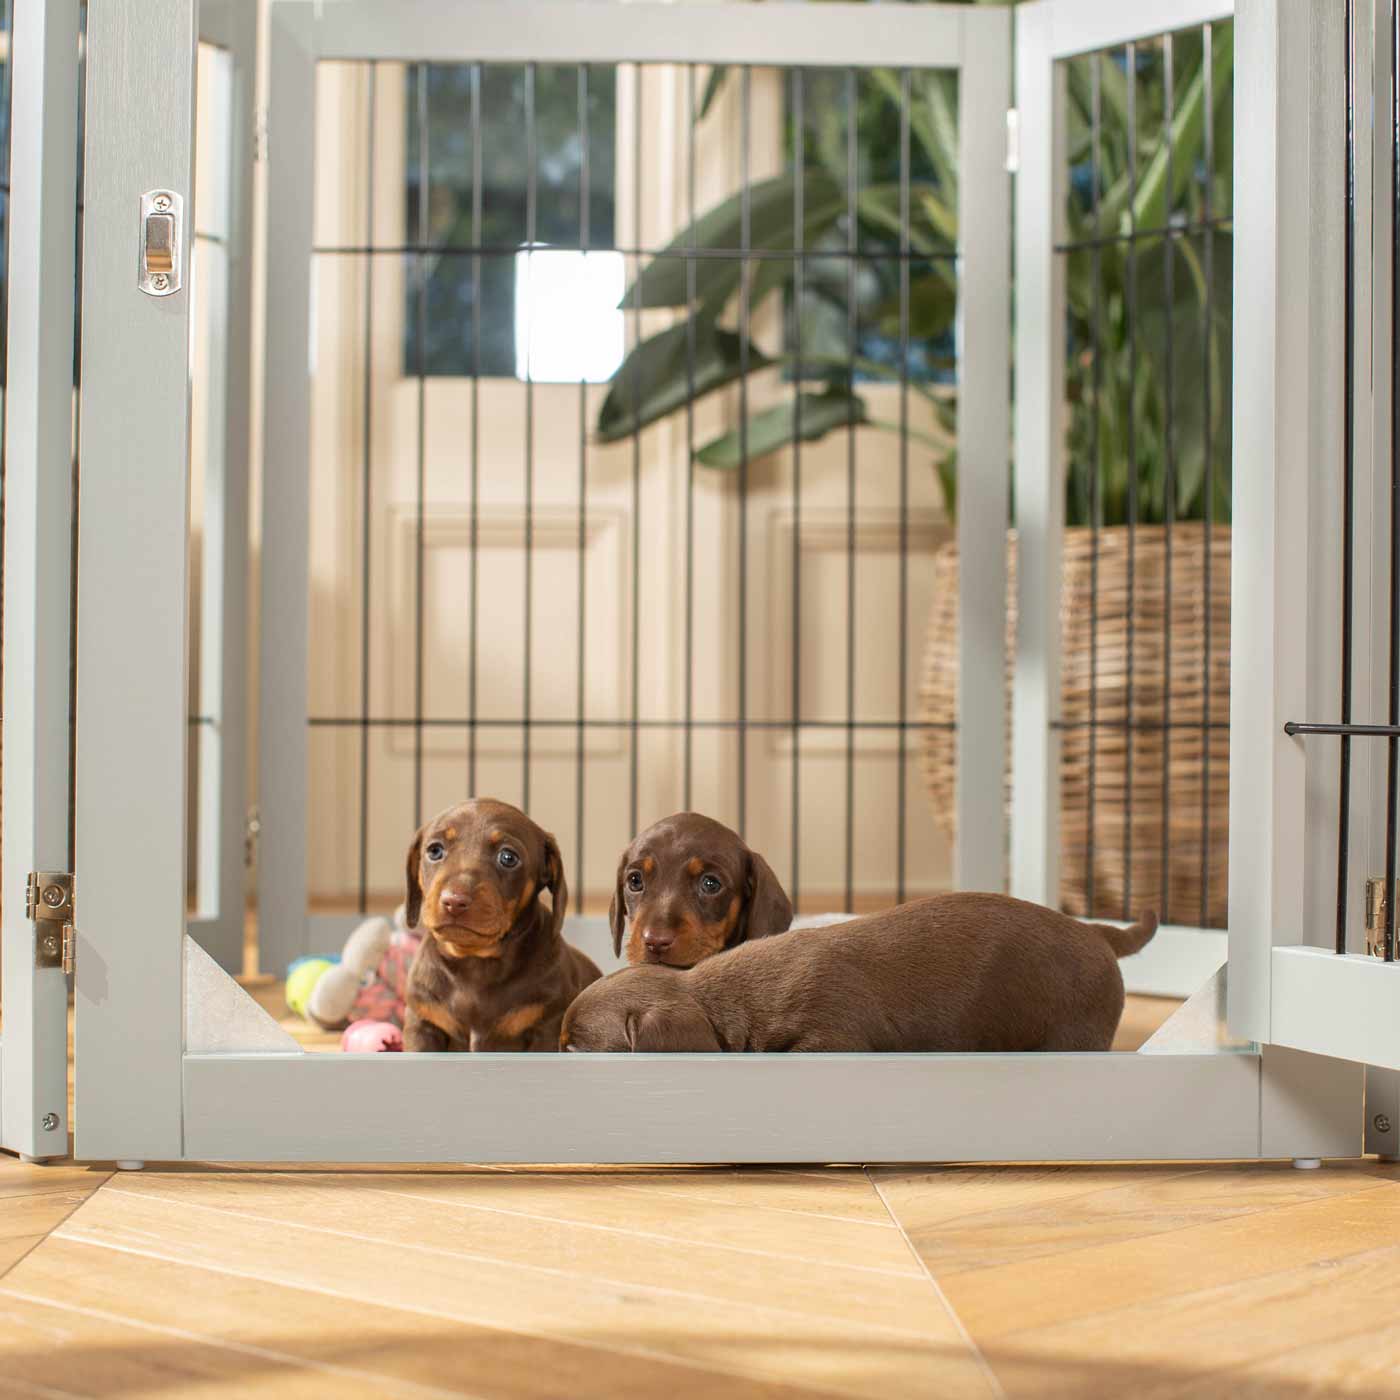 Ensure The Ultimate Puppy Safety with Our Heavy Duty Wooden Puppy Play Pen in Grey or white, Crafted to Take Your Pet Right Through Maturity! Powder Coated to Be Extra Hardwearing! 6 panels that are 80.5cm high! Available To Now at Lords & Labradors